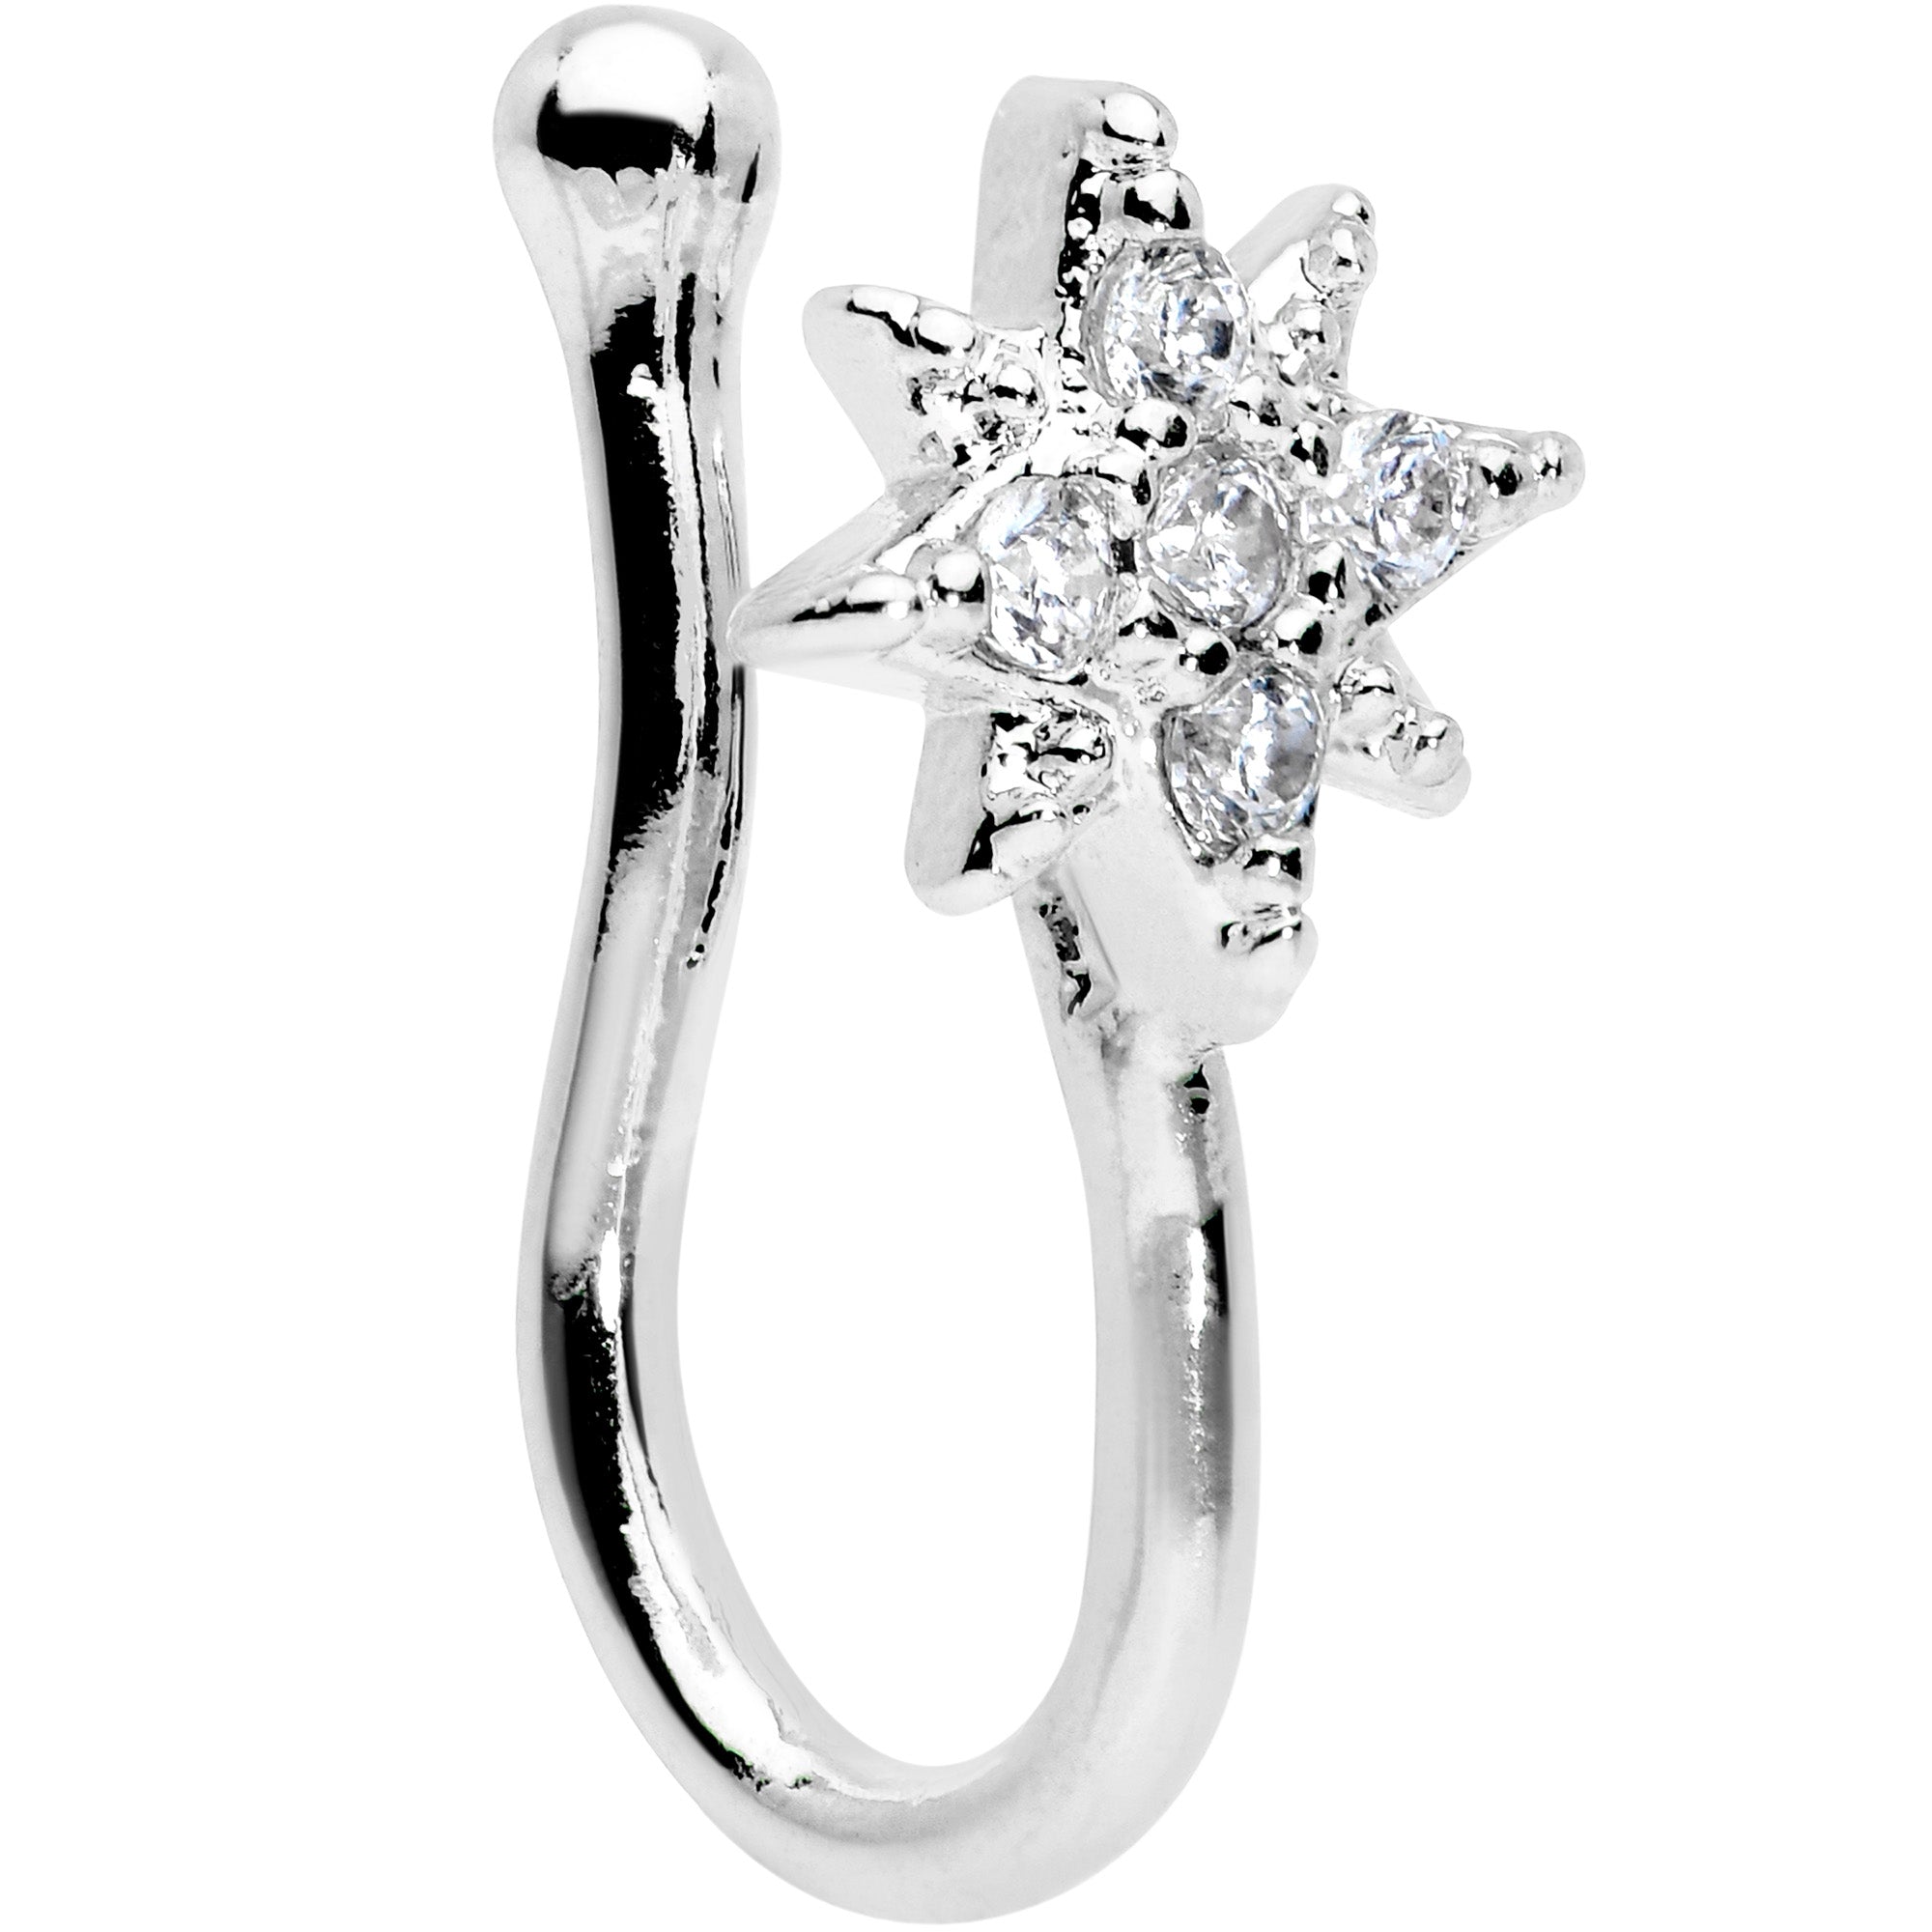 Clear Gem Compass Star Clip On Fake Nose Ring